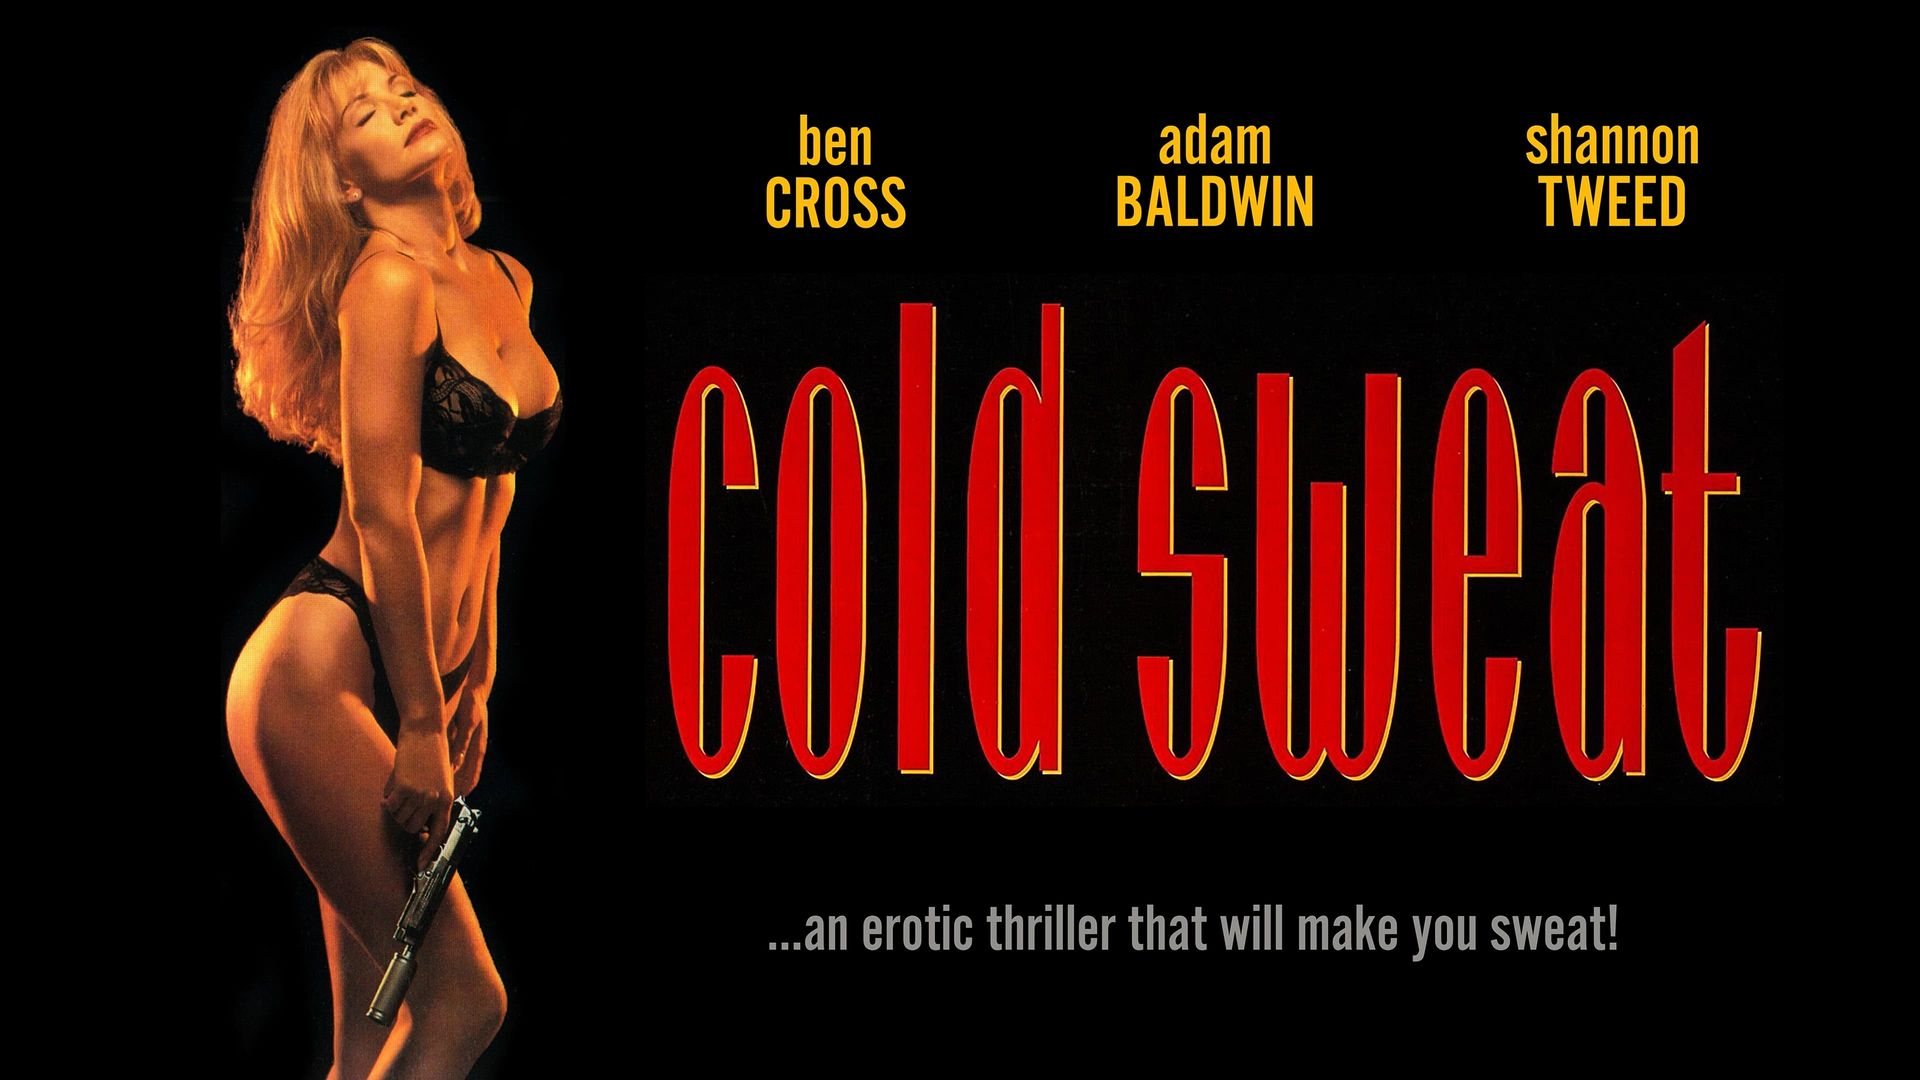 cindy kirk recommends shannon tweed cold sweat pic